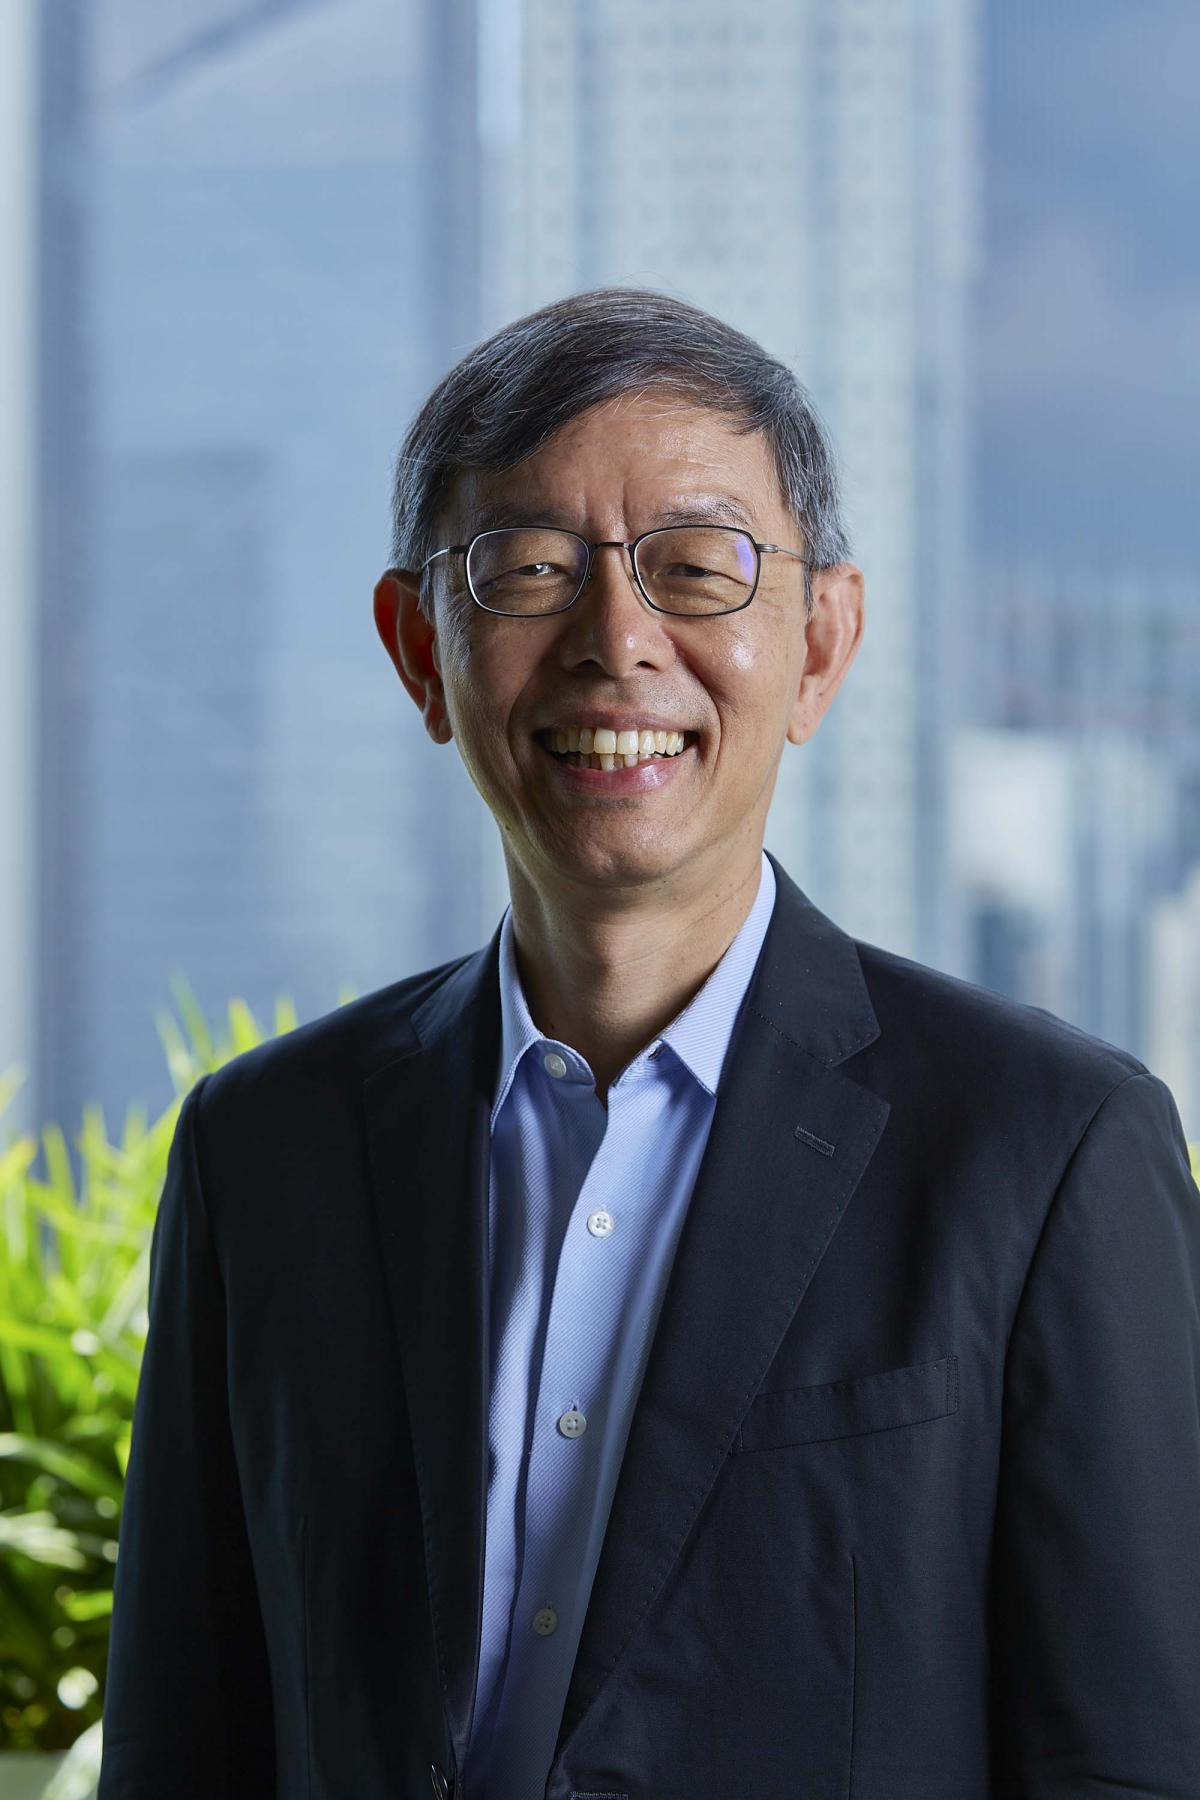 A portrait of Peter Ong smiling, wearing a suit